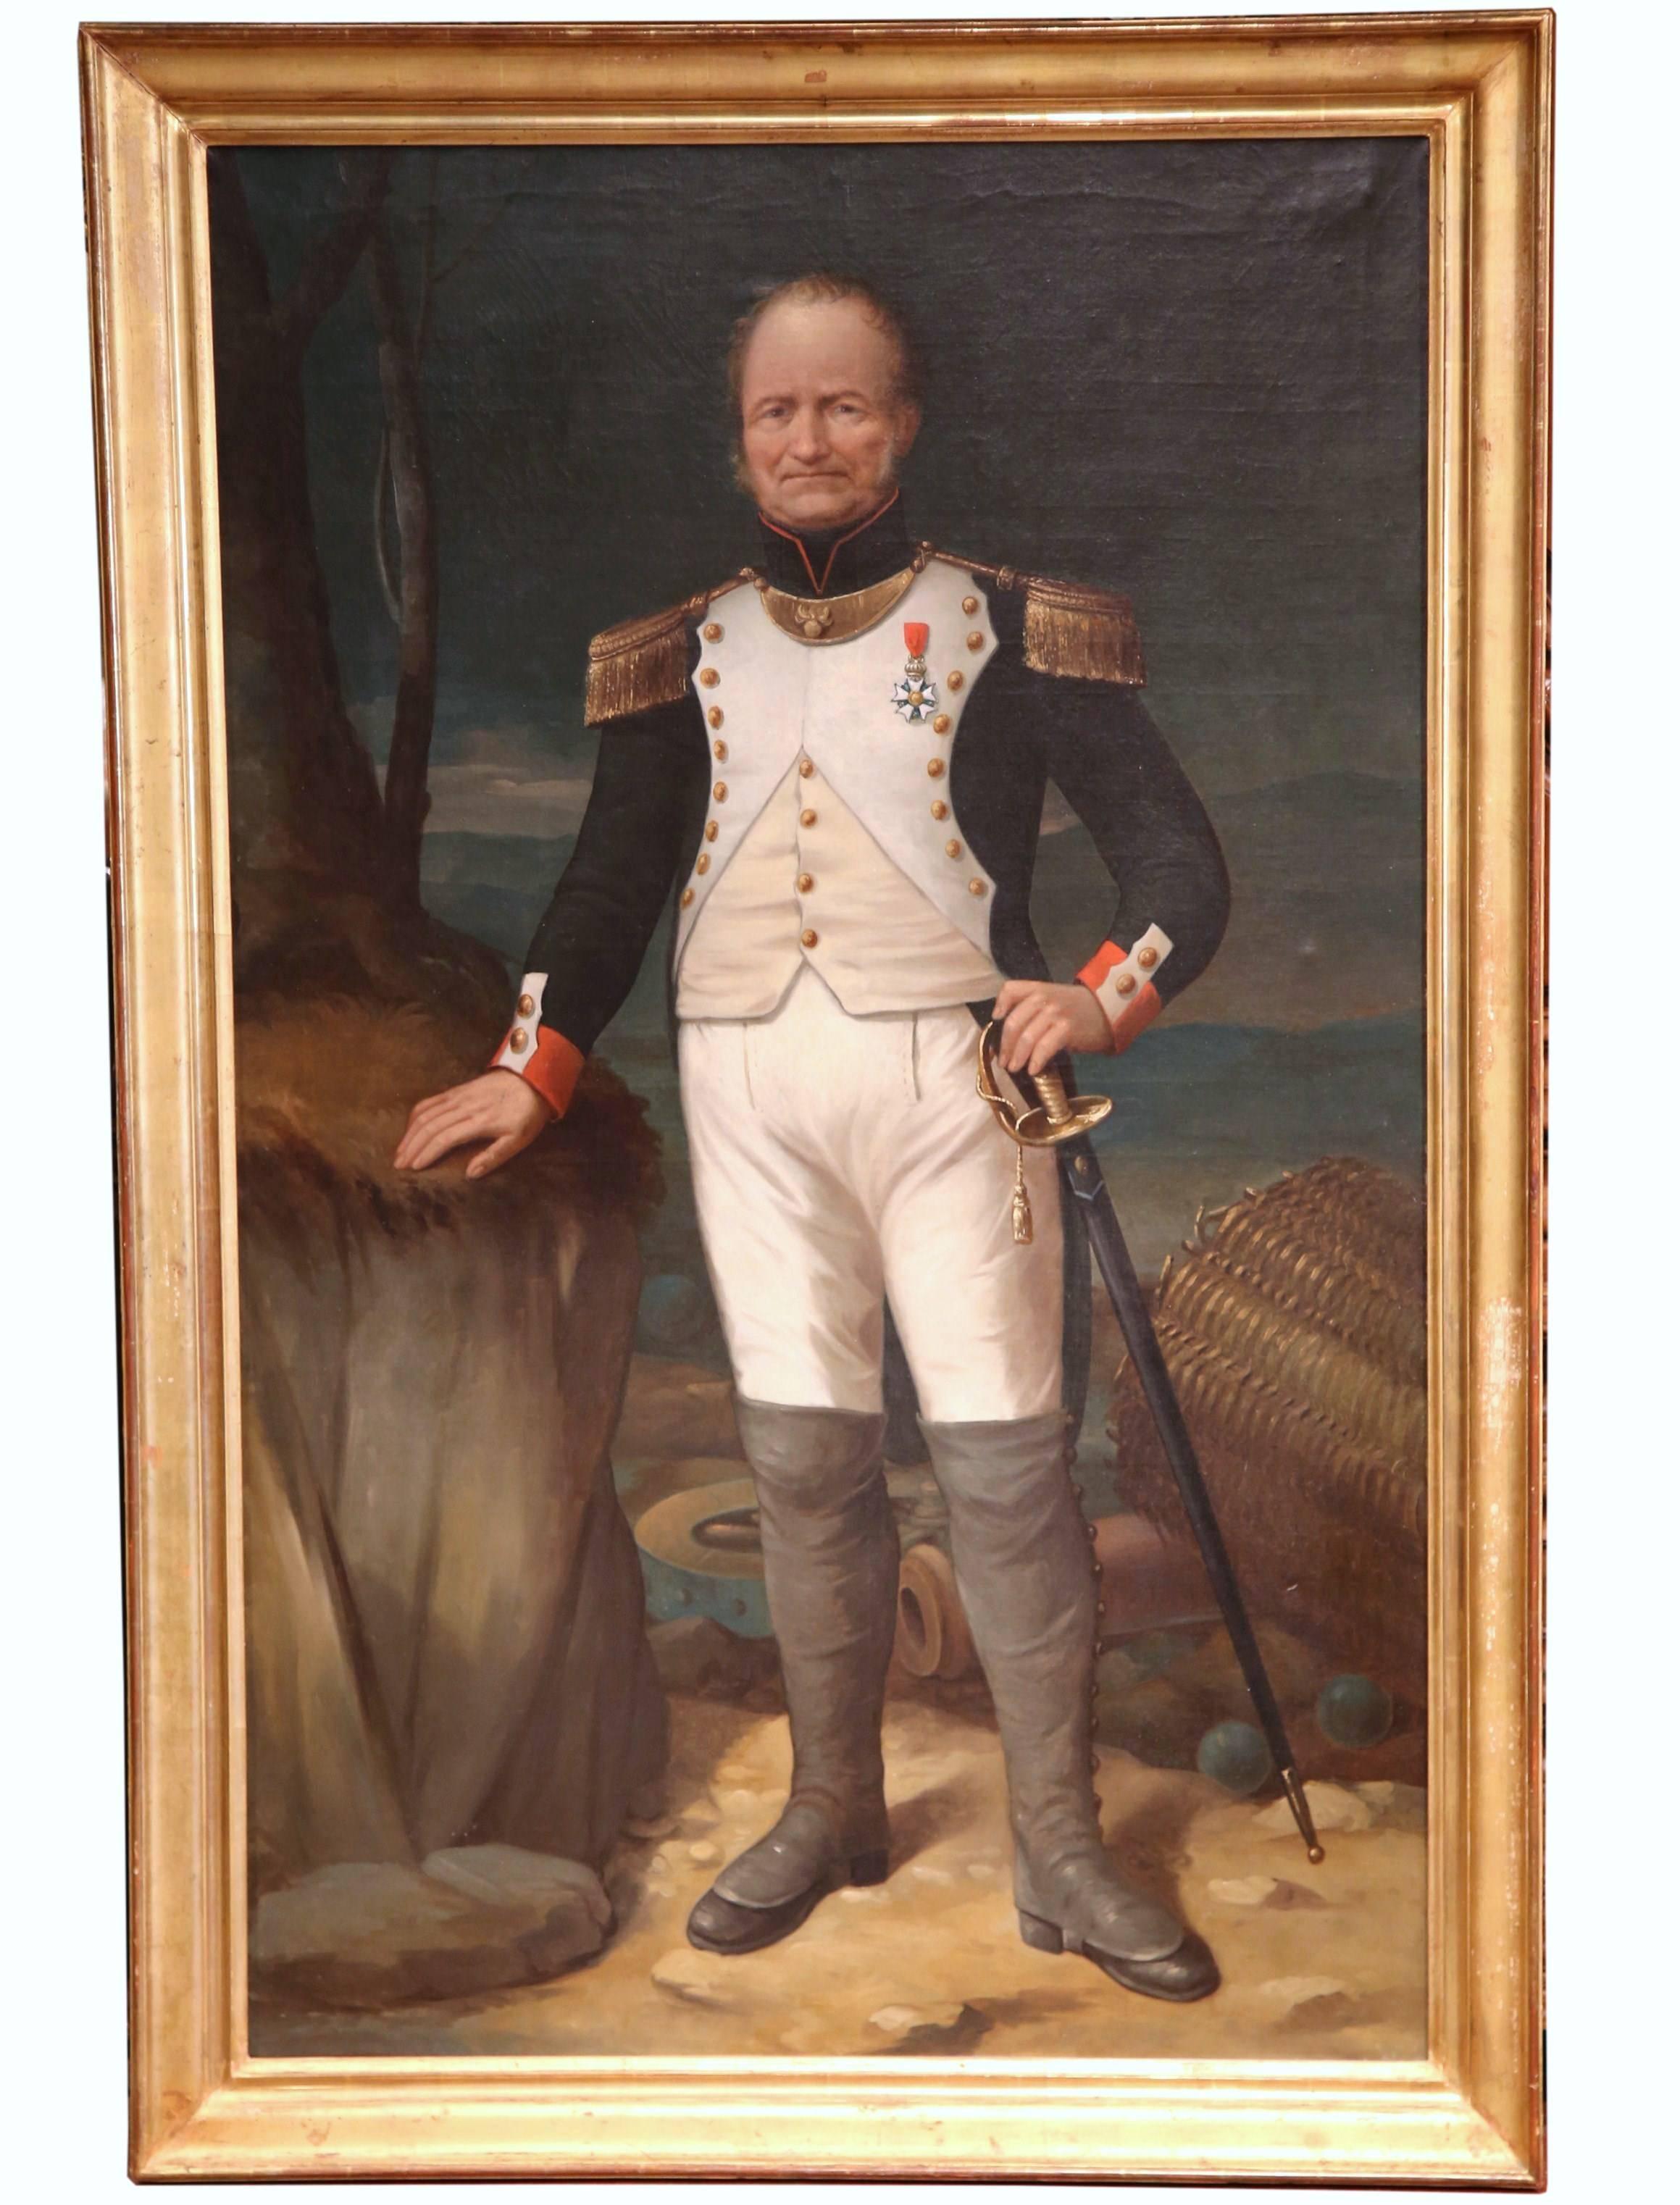 Unknown Portrait Painting - Large Mid 19th Century Oil Painting of a French Officer in Gilt Frame